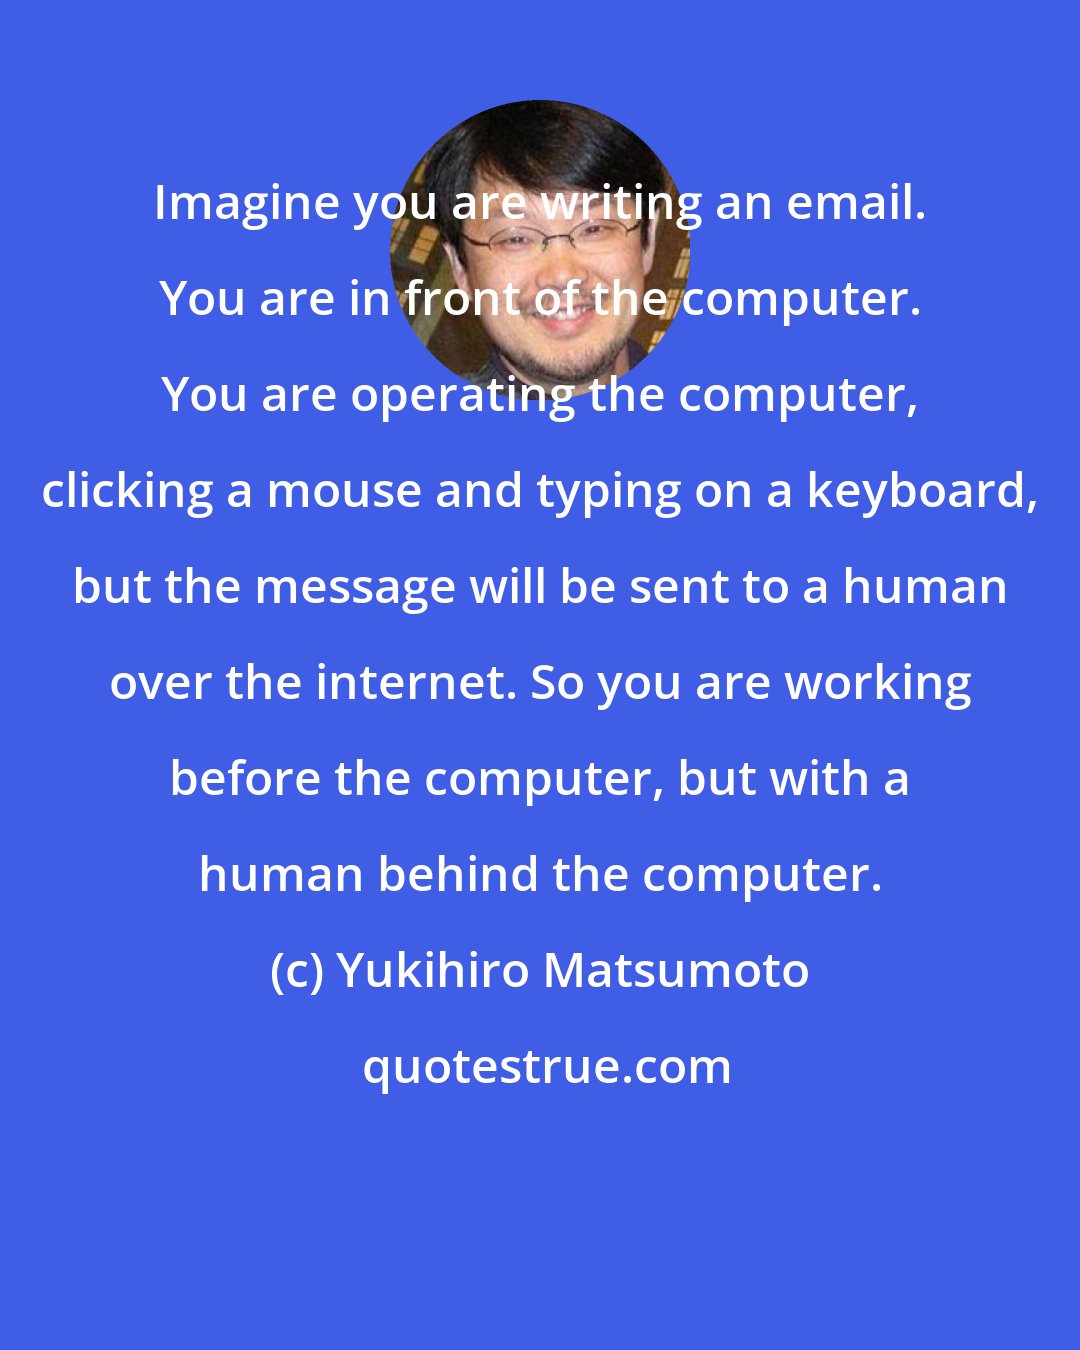 Yukihiro Matsumoto: Imagine you are writing an email. You are in front of the computer. You are operating the computer, clicking a mouse and typing on a keyboard, but the message will be sent to a human over the internet. So you are working before the computer, but with a human behind the computer.